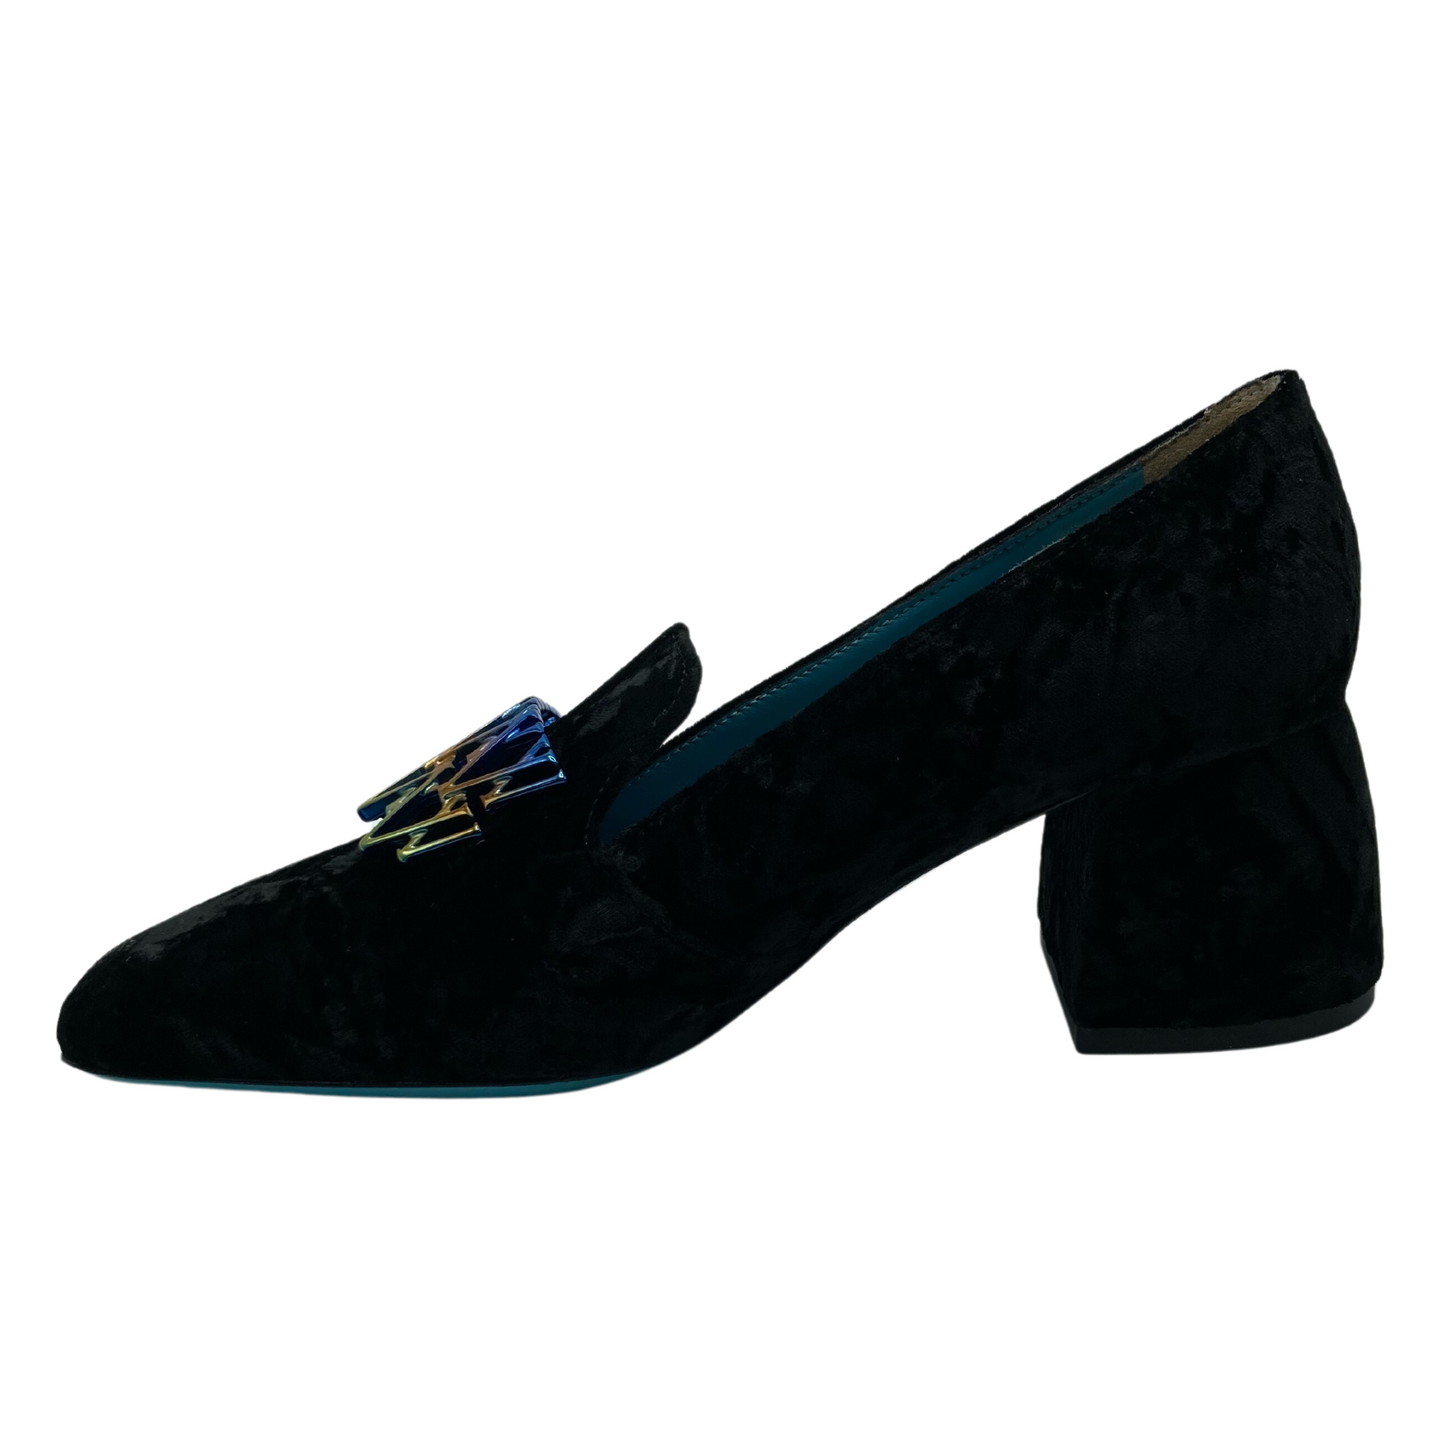 Left facing view of block heeled loafer made of black suede with a multicoloured detail on upper